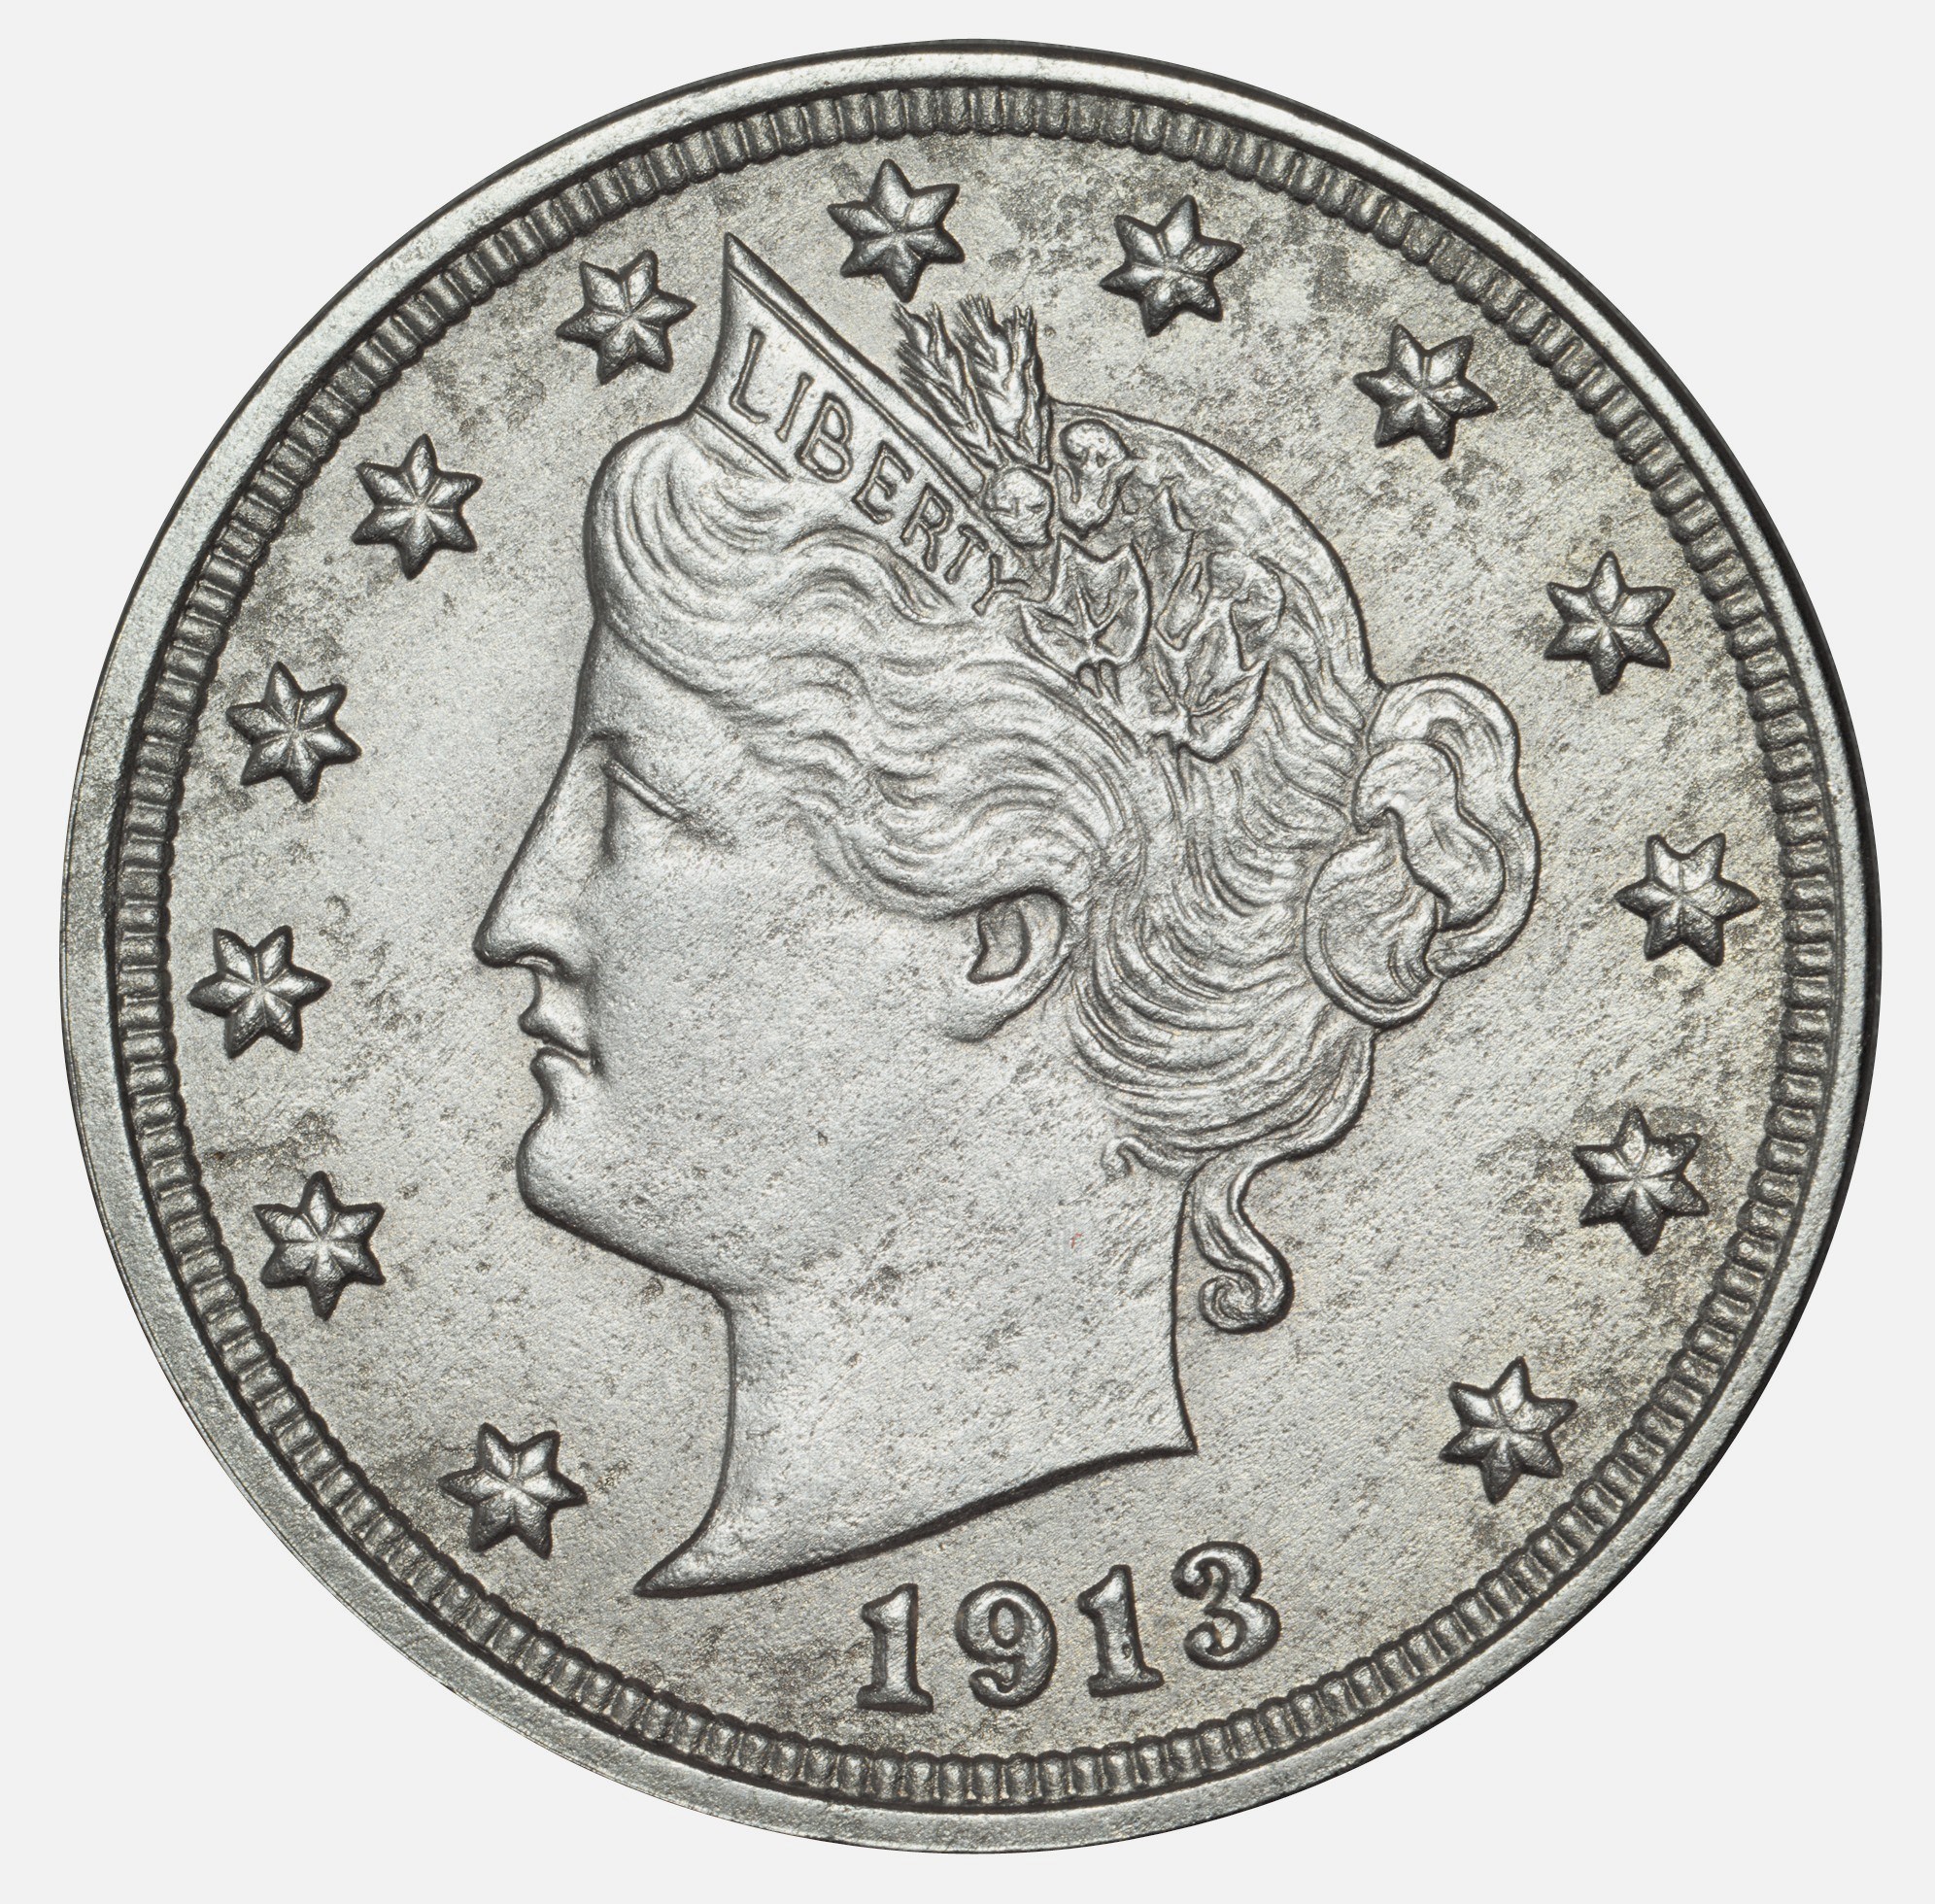 Insured for $2.5 million, this famous 1913 Liberty Head nickel is one of only five known and will be displayed at the 2014 National Money Show in  Atlanta.